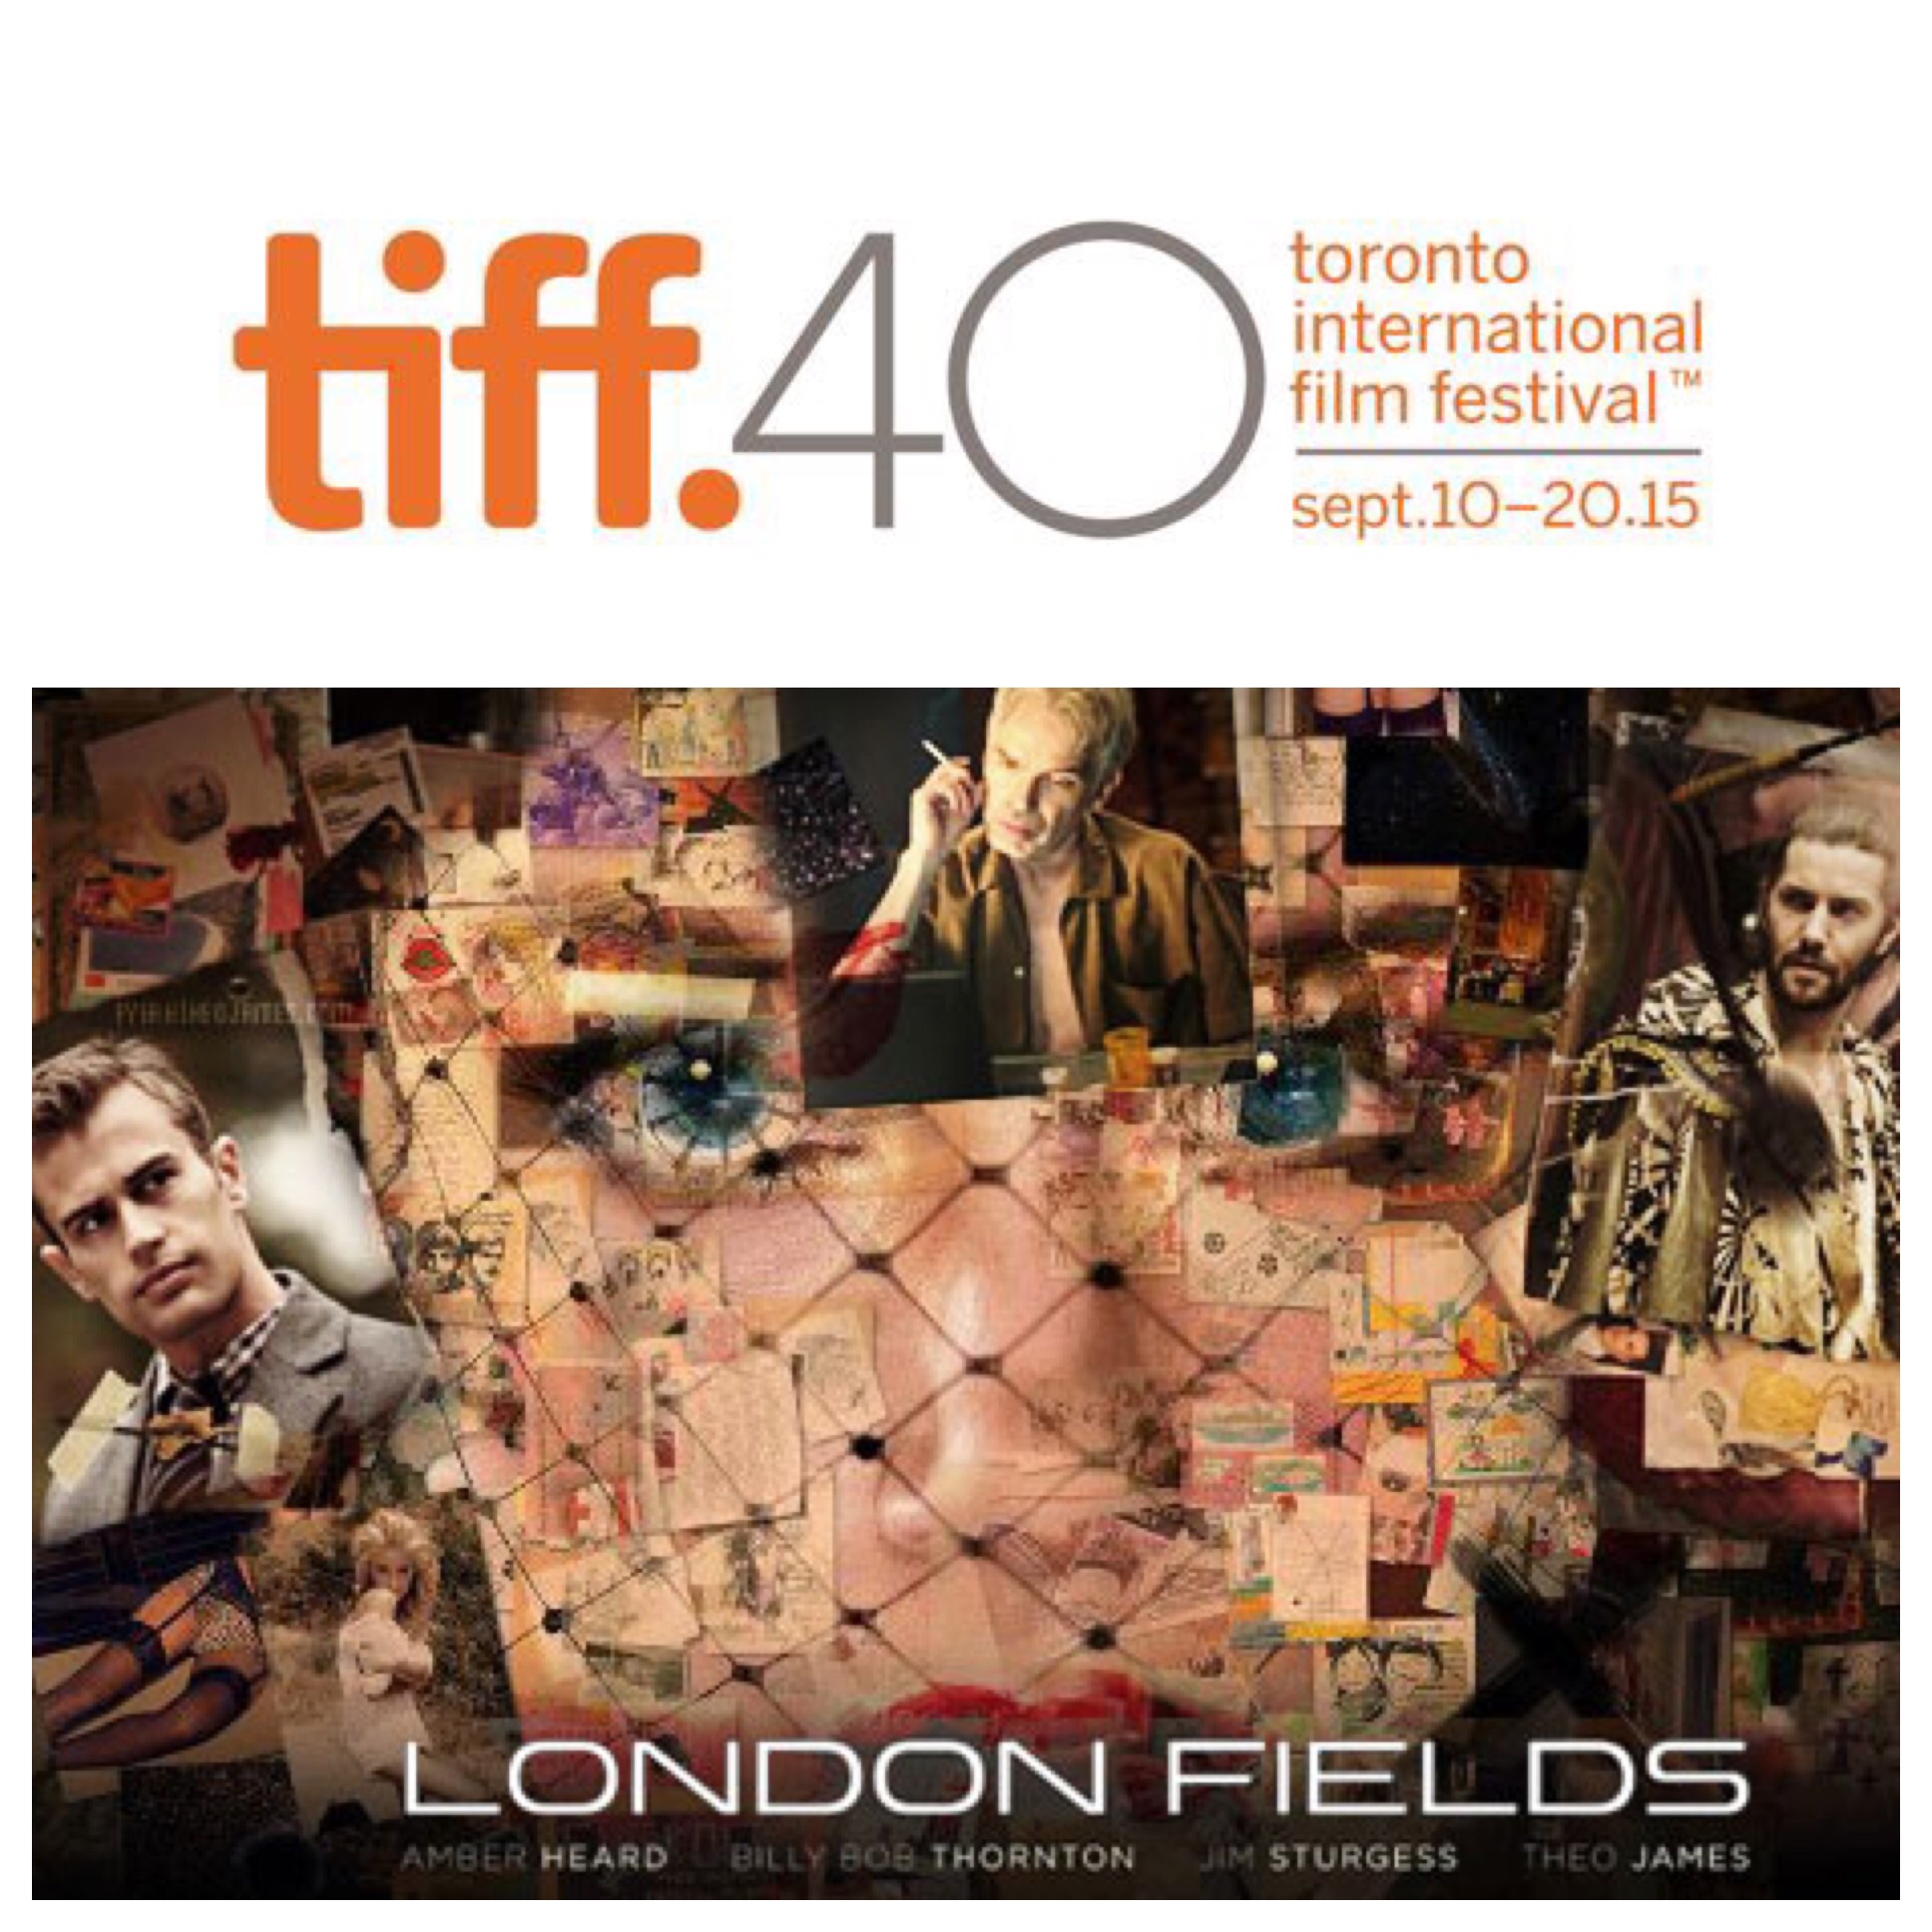 ‘London Fields’ with Theo James will Premier at TIFF 